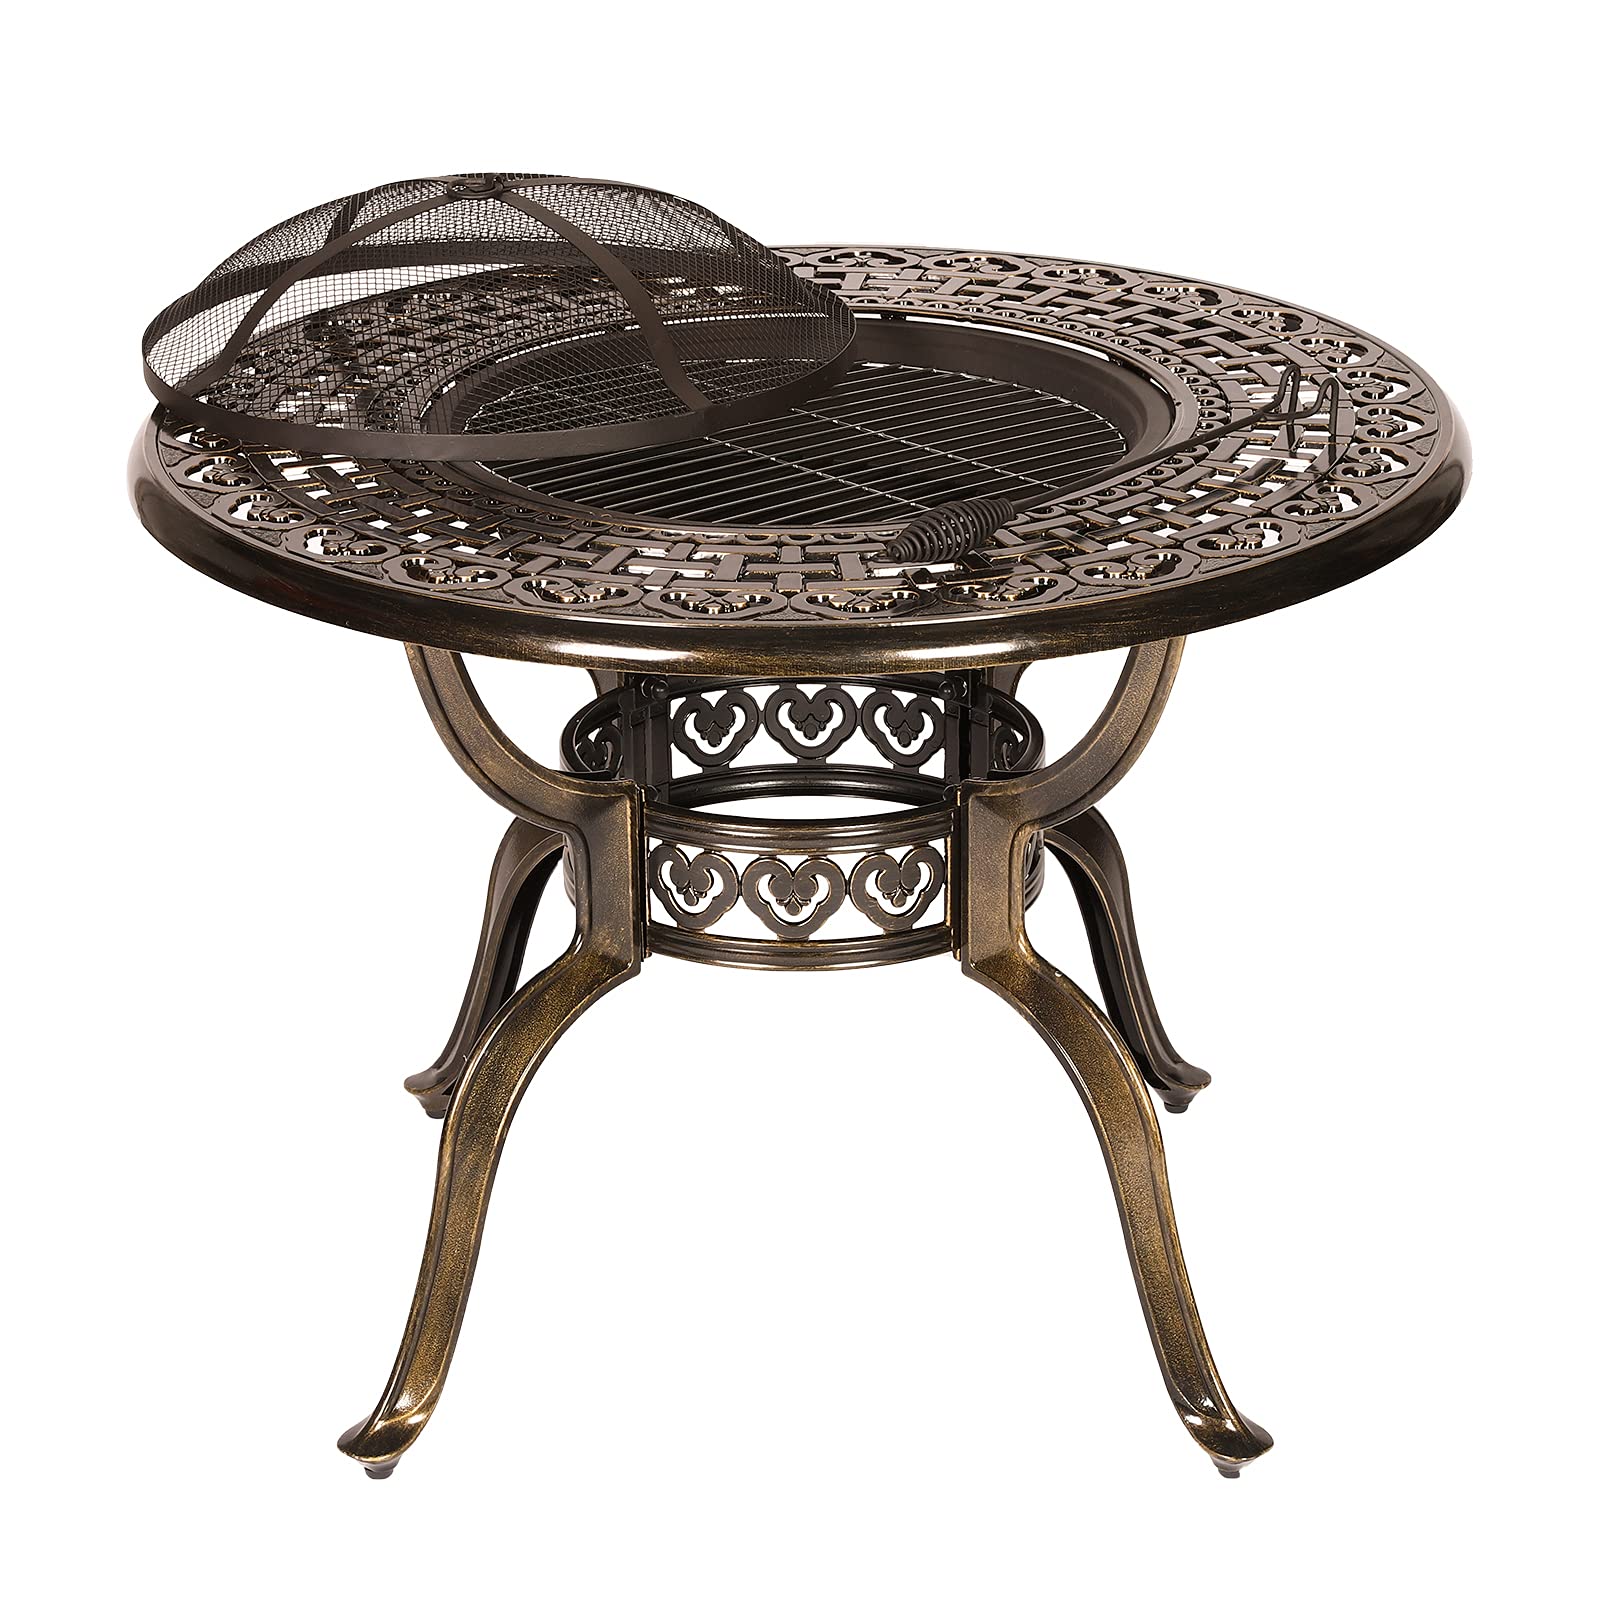 VIVIJASON 40.3" Patio Round Fire Pit Dining Table Charcoal/Wood Burning Outdoor Cast Aluminum Furniture Table with Fire Bowl, Cooking BBQ Grill, Wood Grate, Spark Screen and Poker for Backyard Lawn